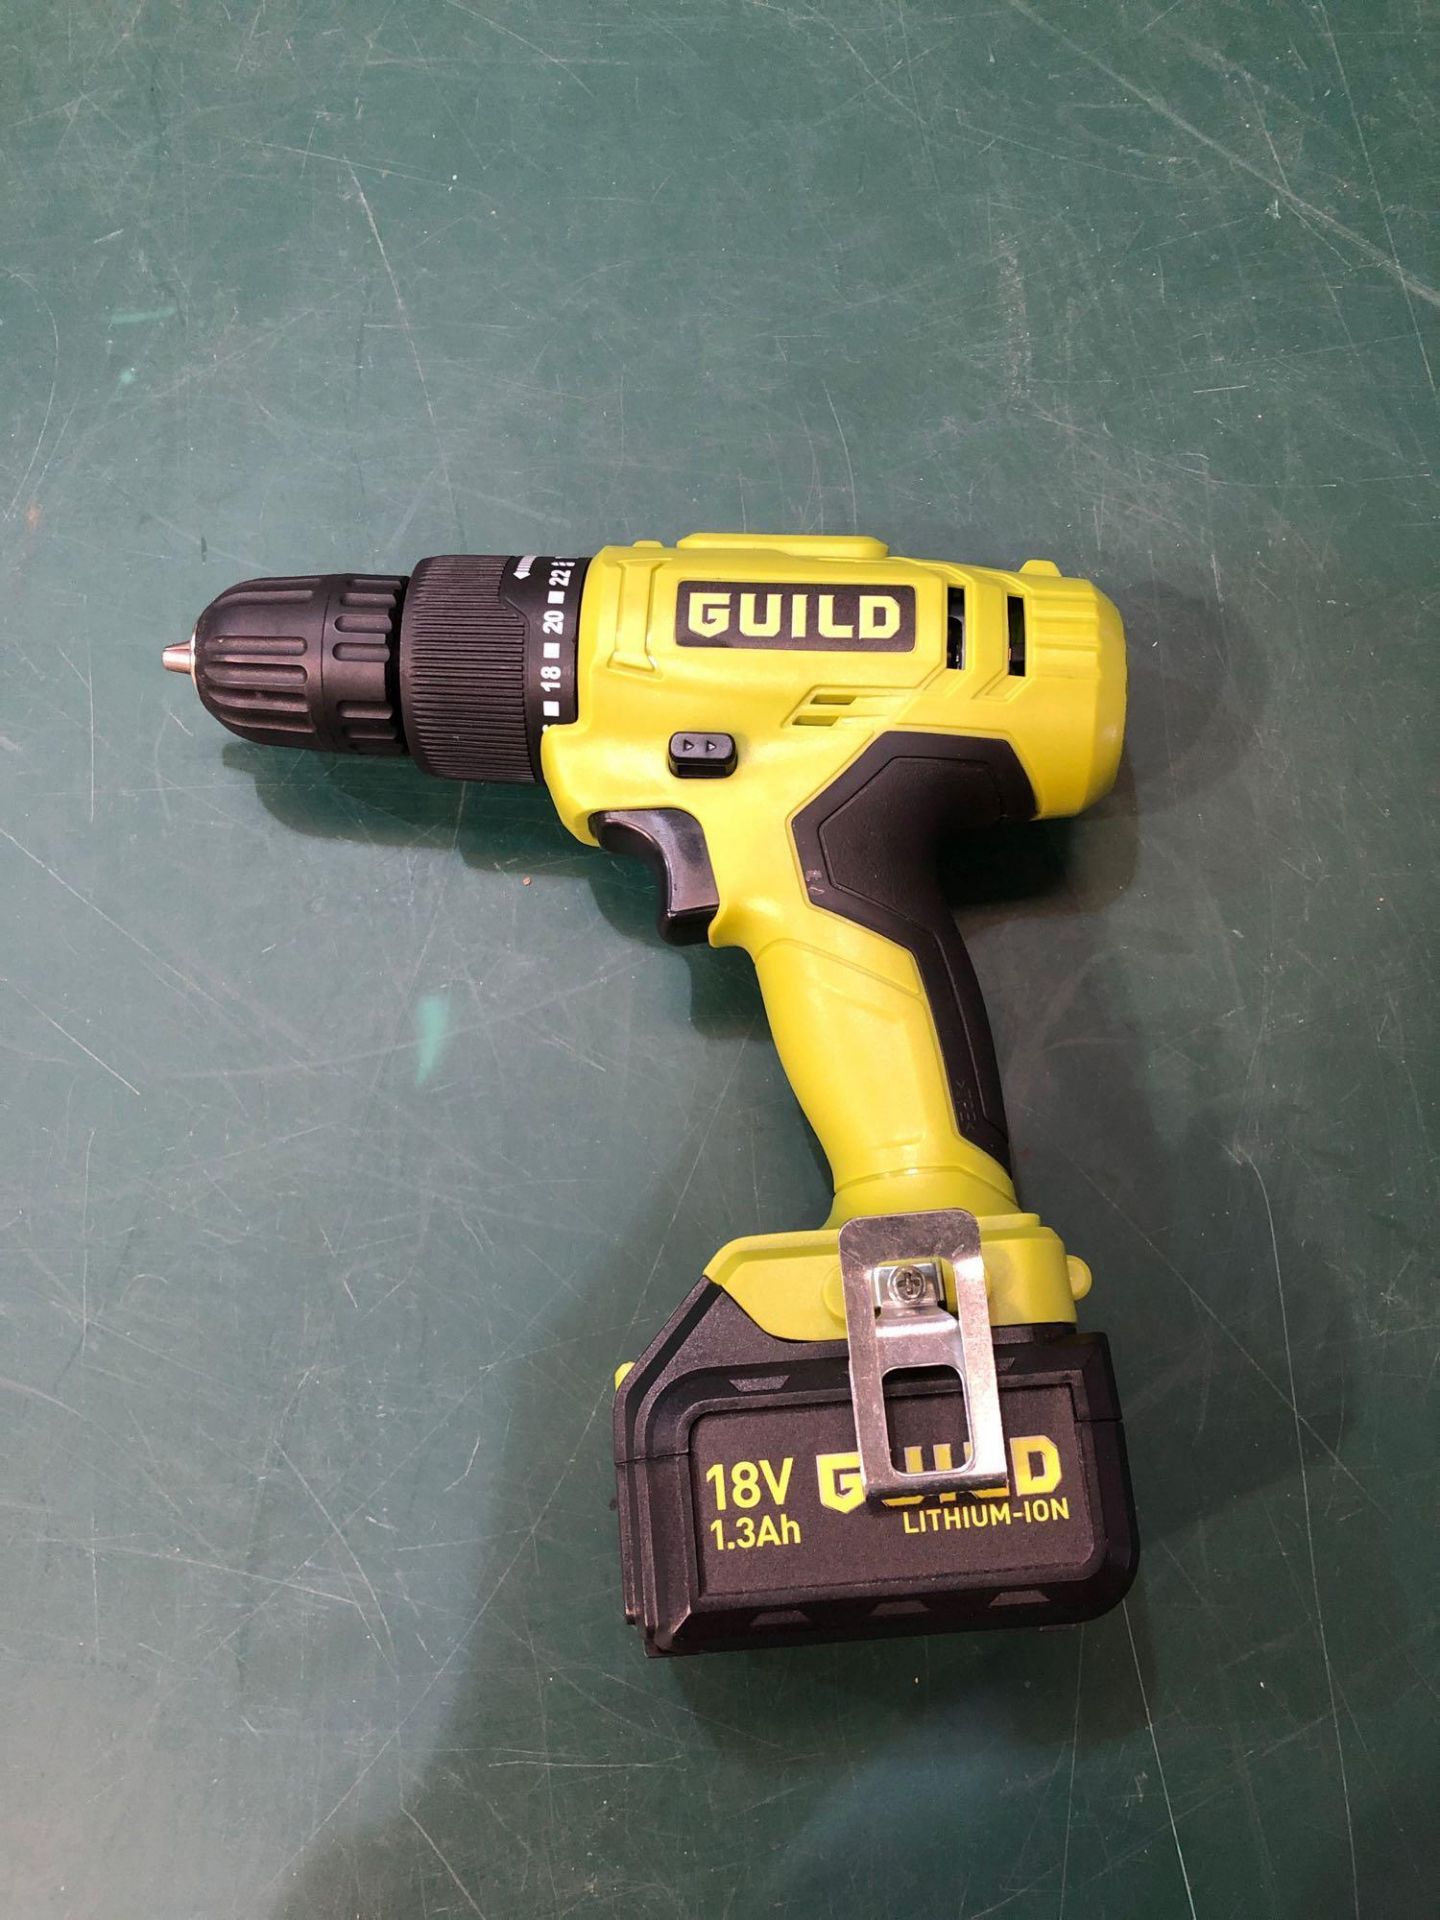 Guild 1.3AH Cordless Drill Driver - 18V 451/9889 £35.00 RRP - Image 2 of 4